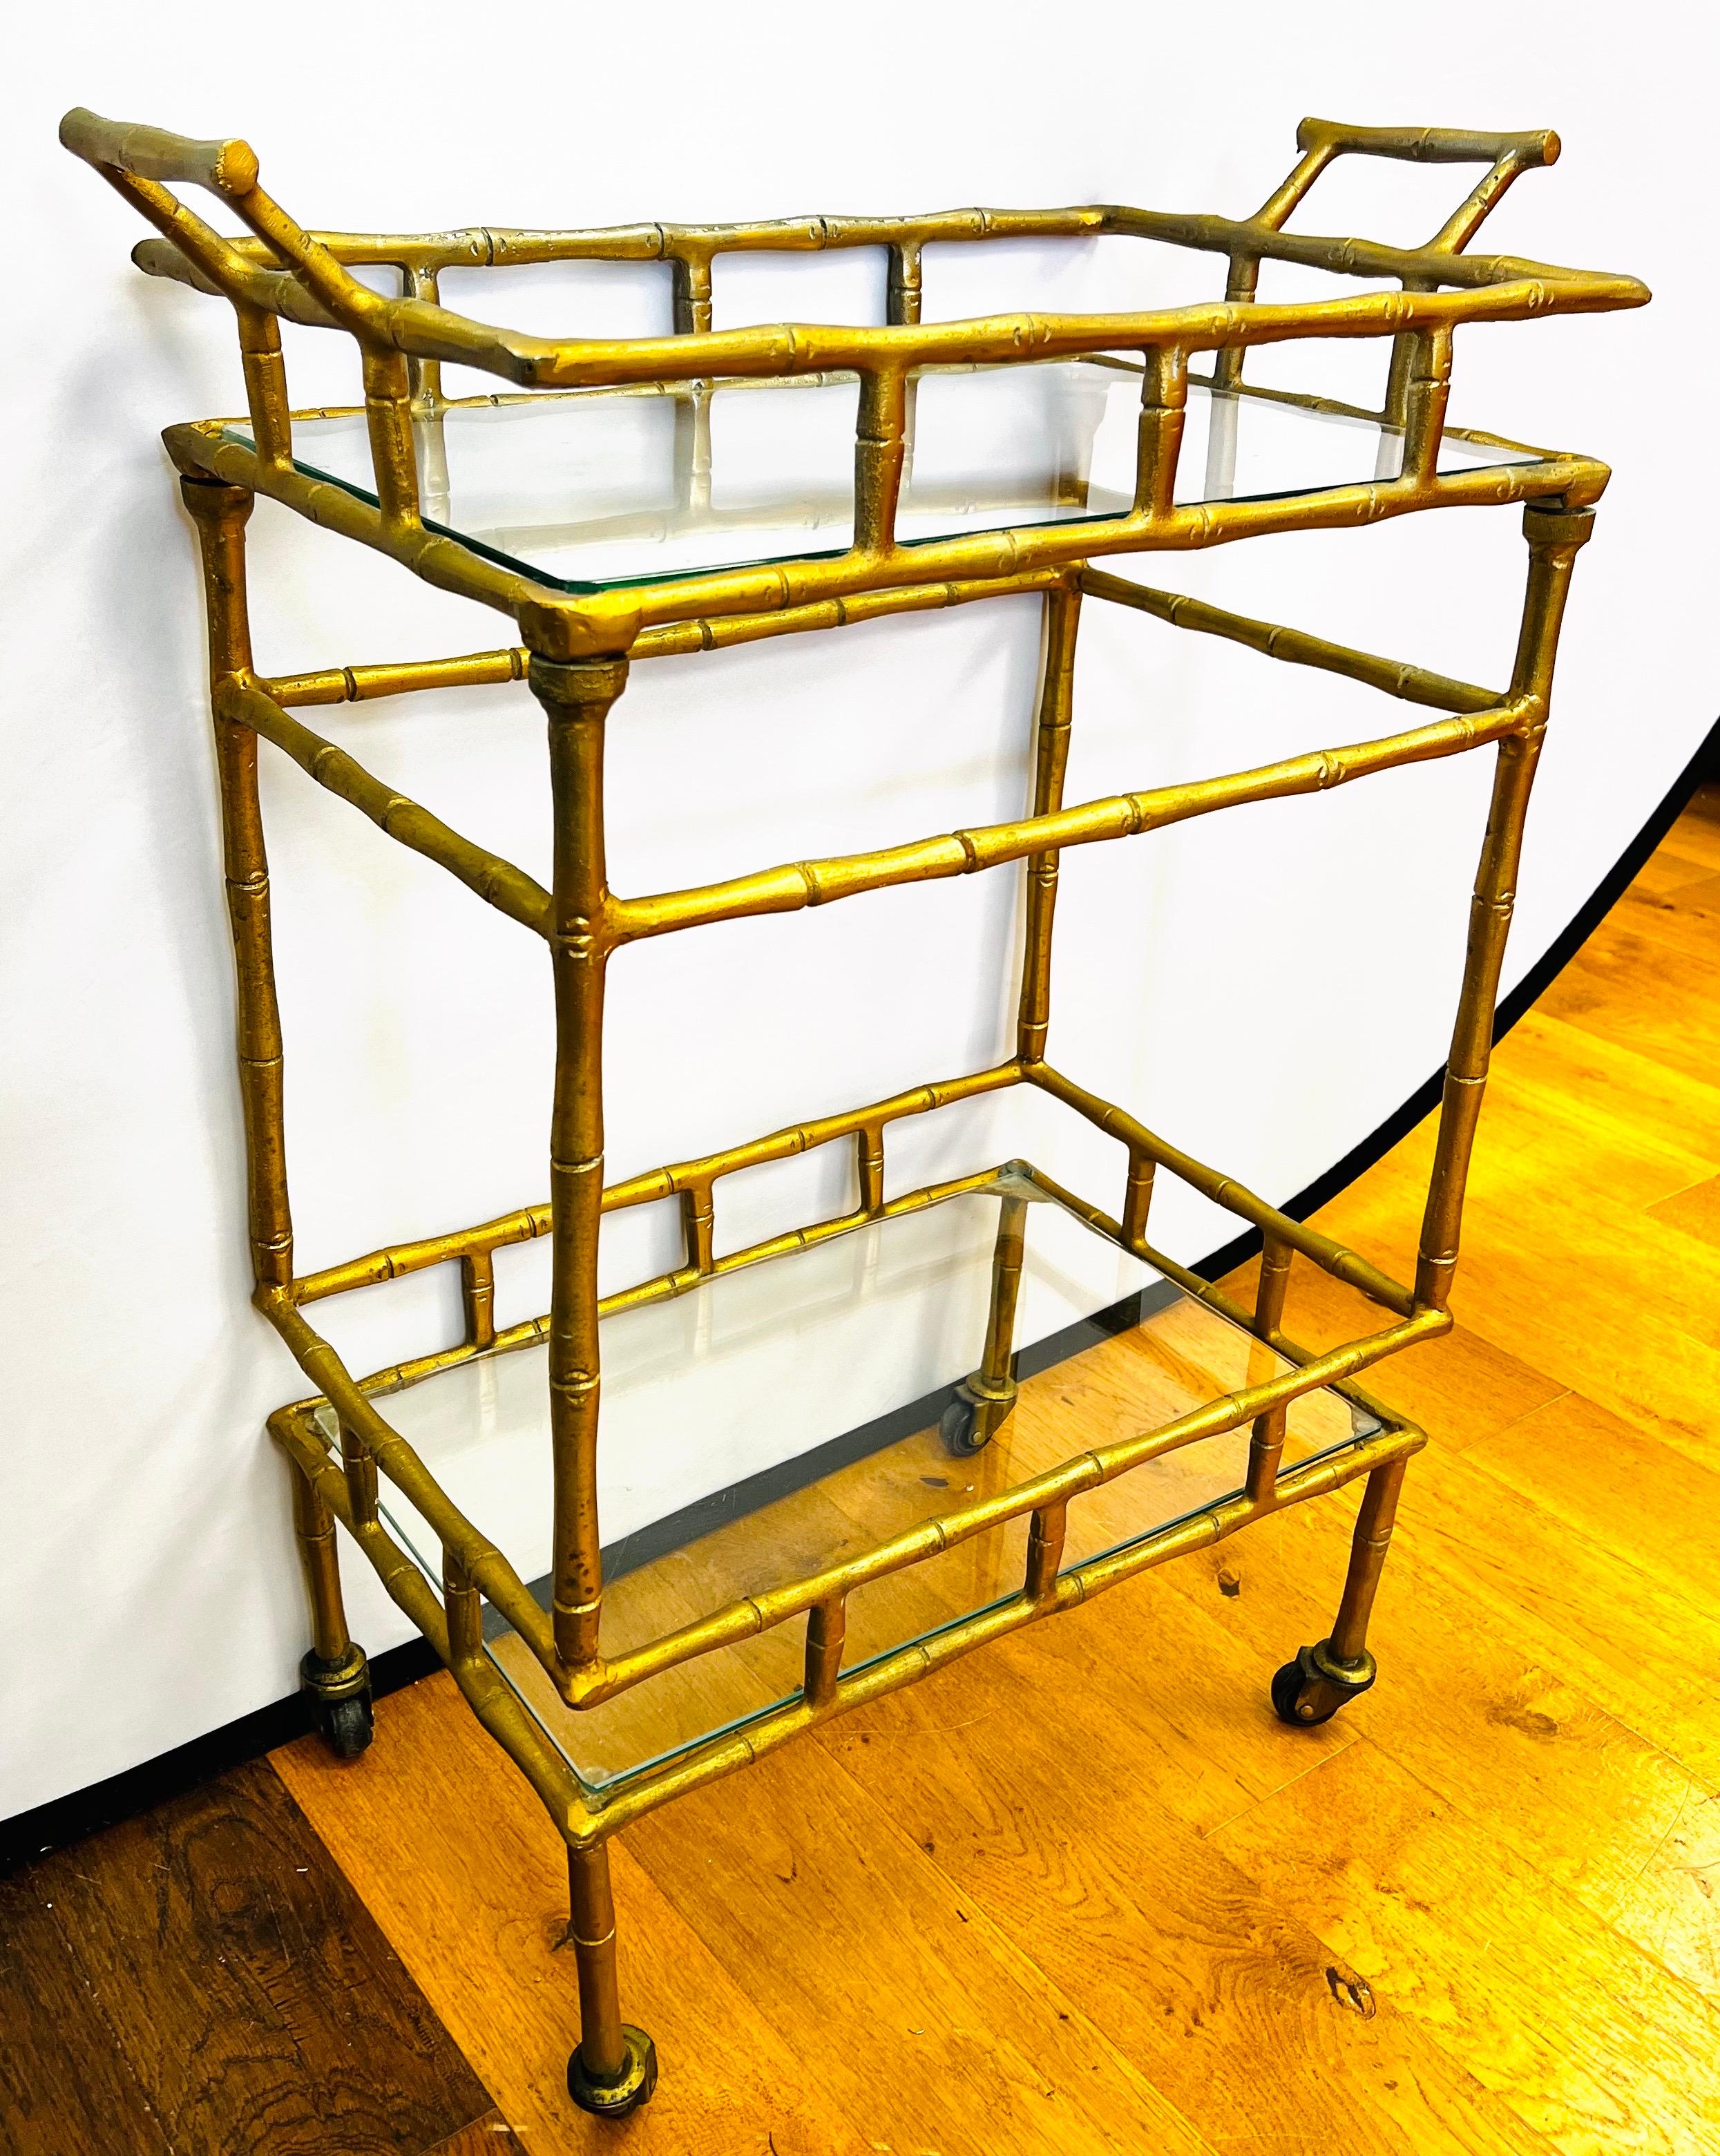 This small gold faux bamboo metal bar cart is the perfect size for any room where you want to entertain your guests. Features glass shelves and wheels. Top tray is removable.
No more getting up to refill your guest’s drinks with this bar cart!